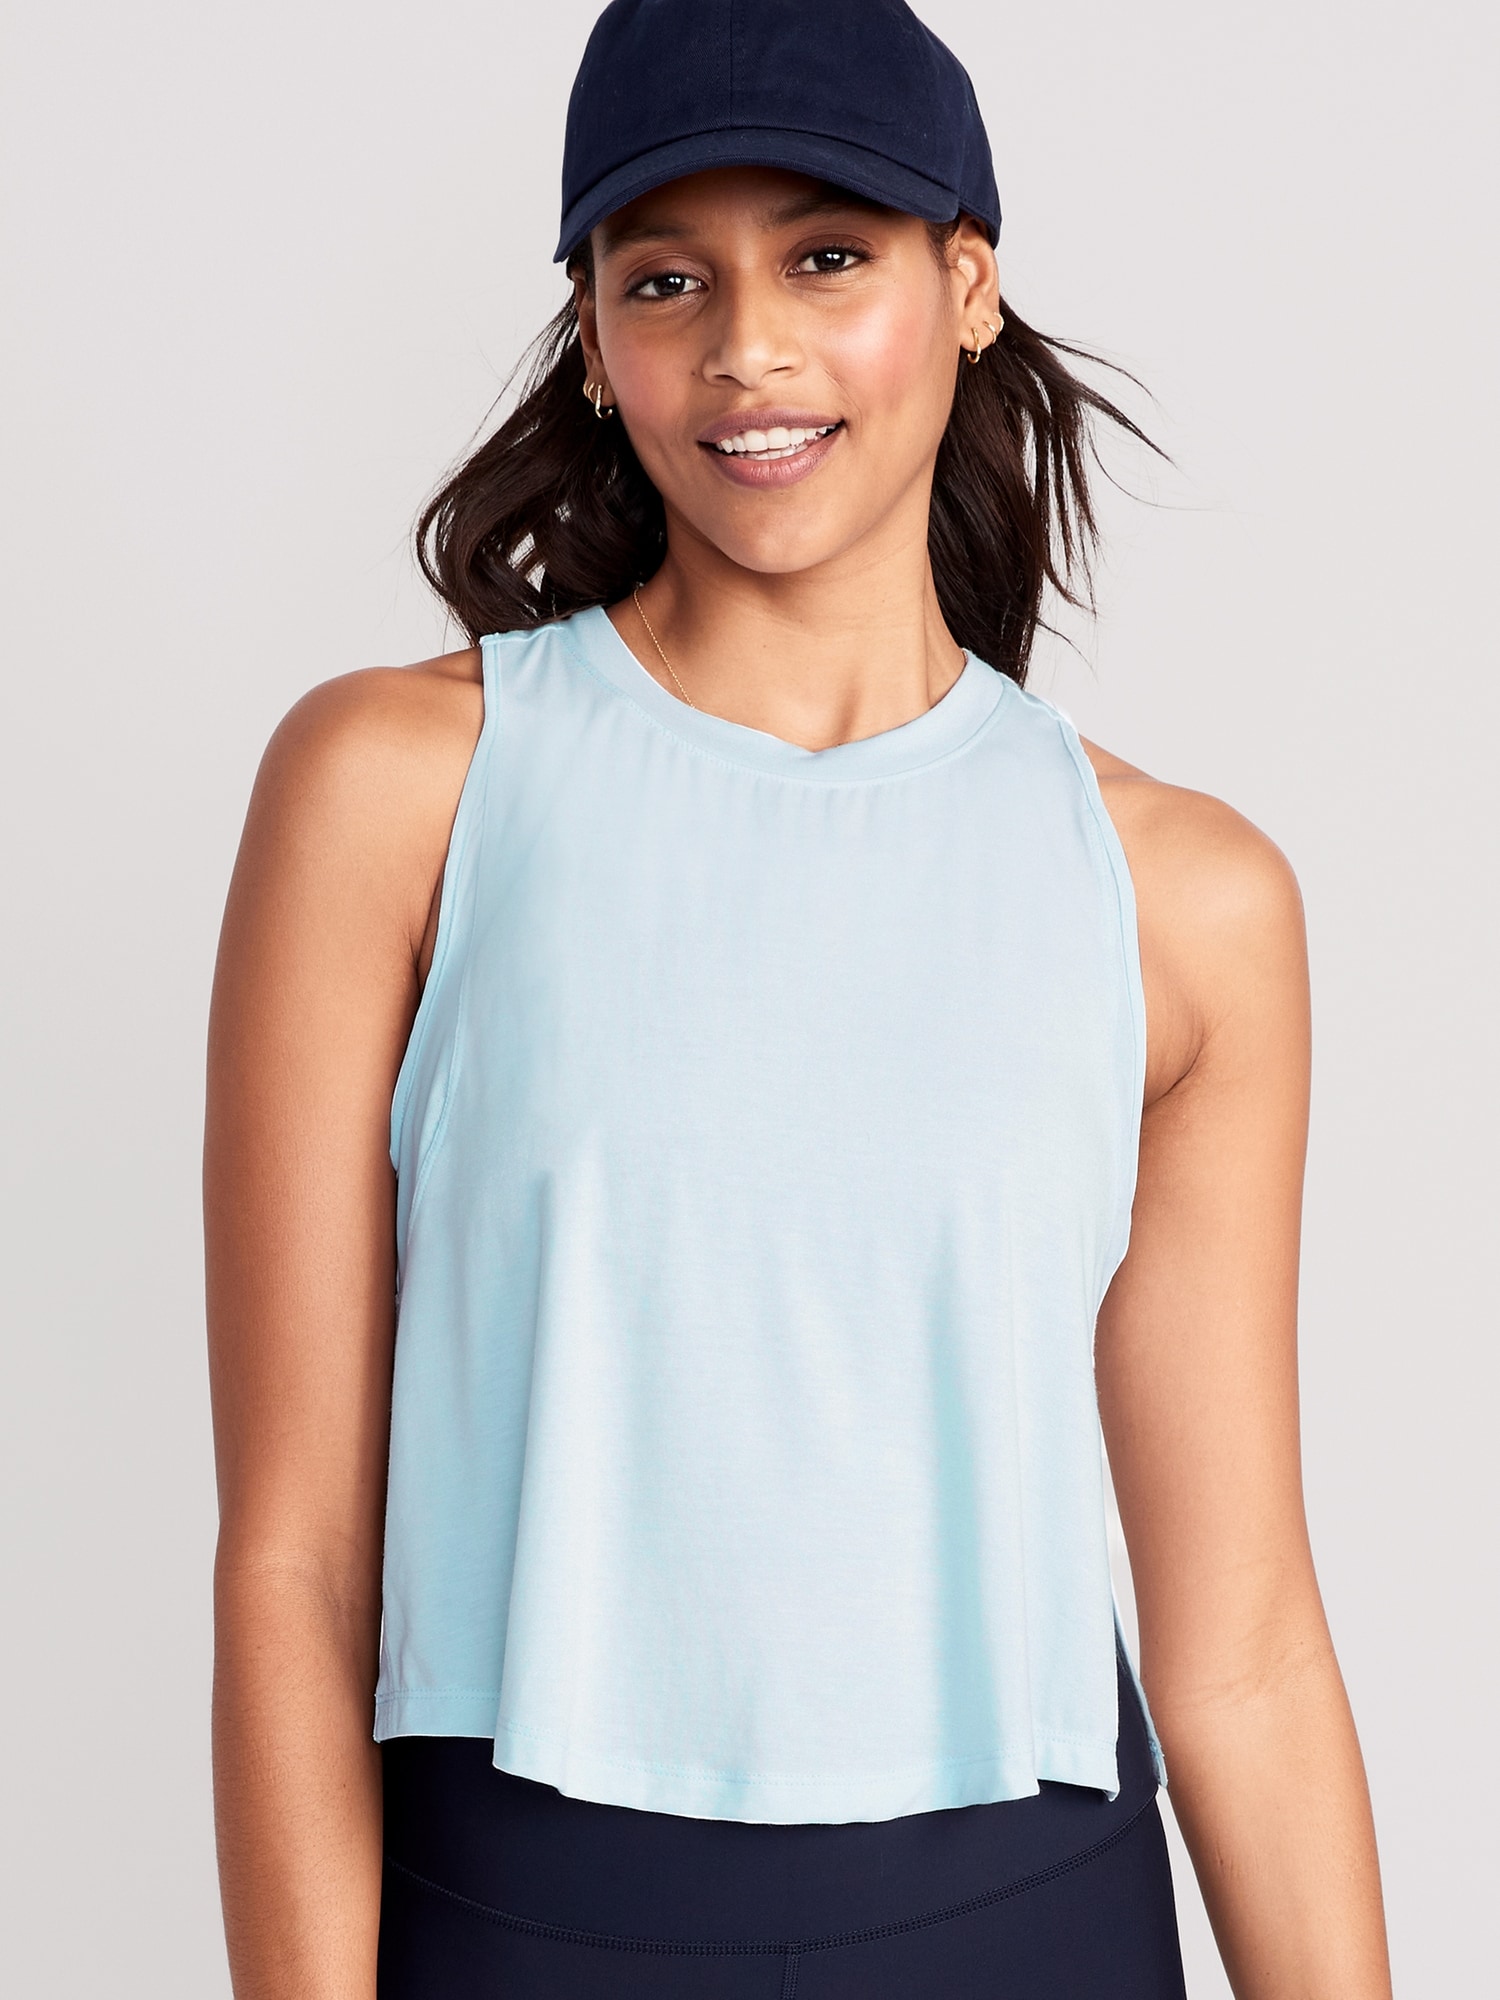 Old Navy UltraLite All-Day Sleeveless Cropped Top for Women blue. 1